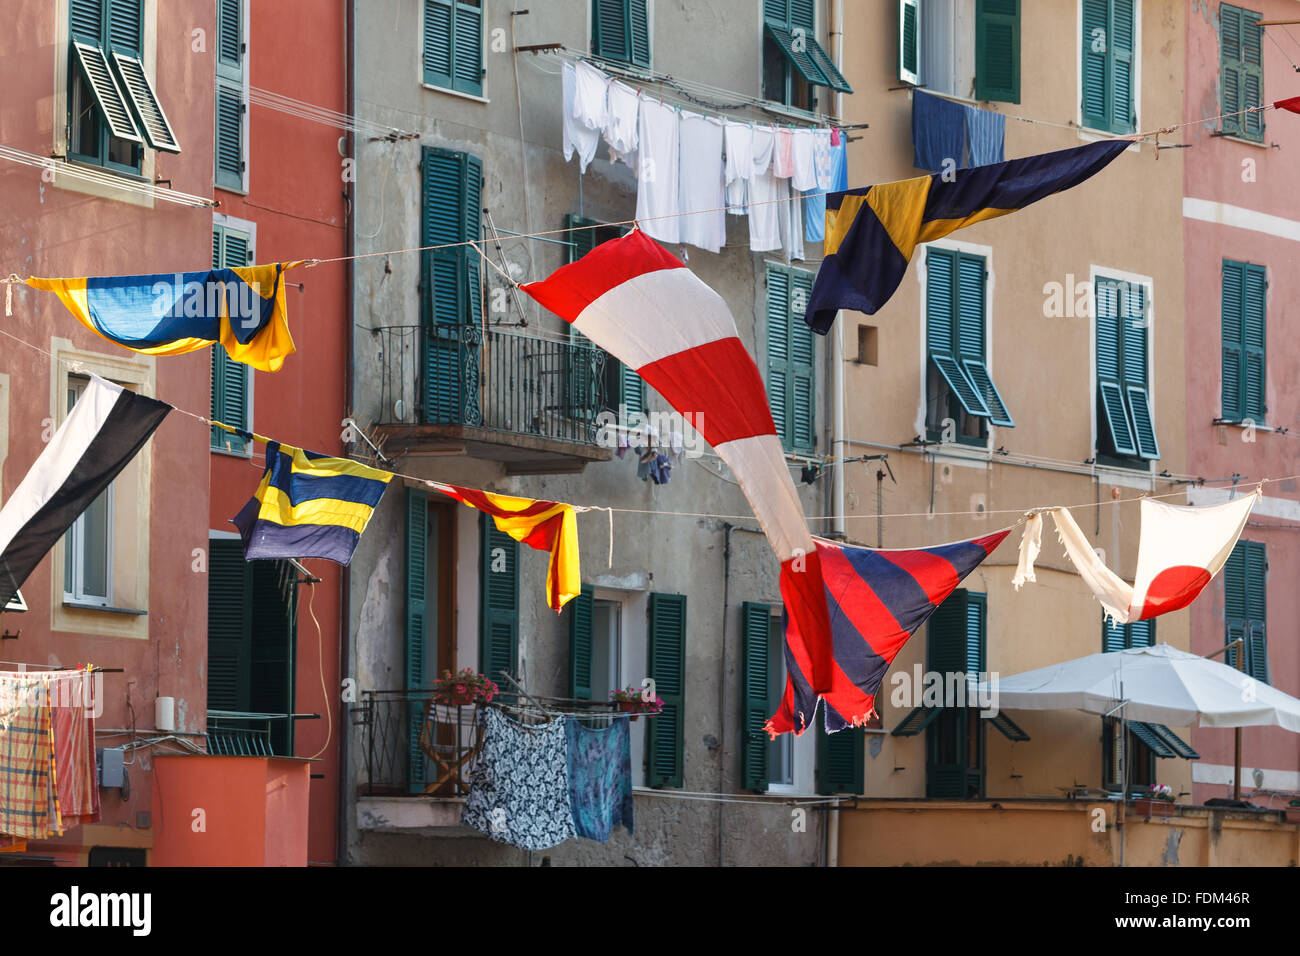 Some flags and balconies and window in Vernazza, Cinque Terre (Five Lands) National Park, Liguria, Italy. Stock Photo